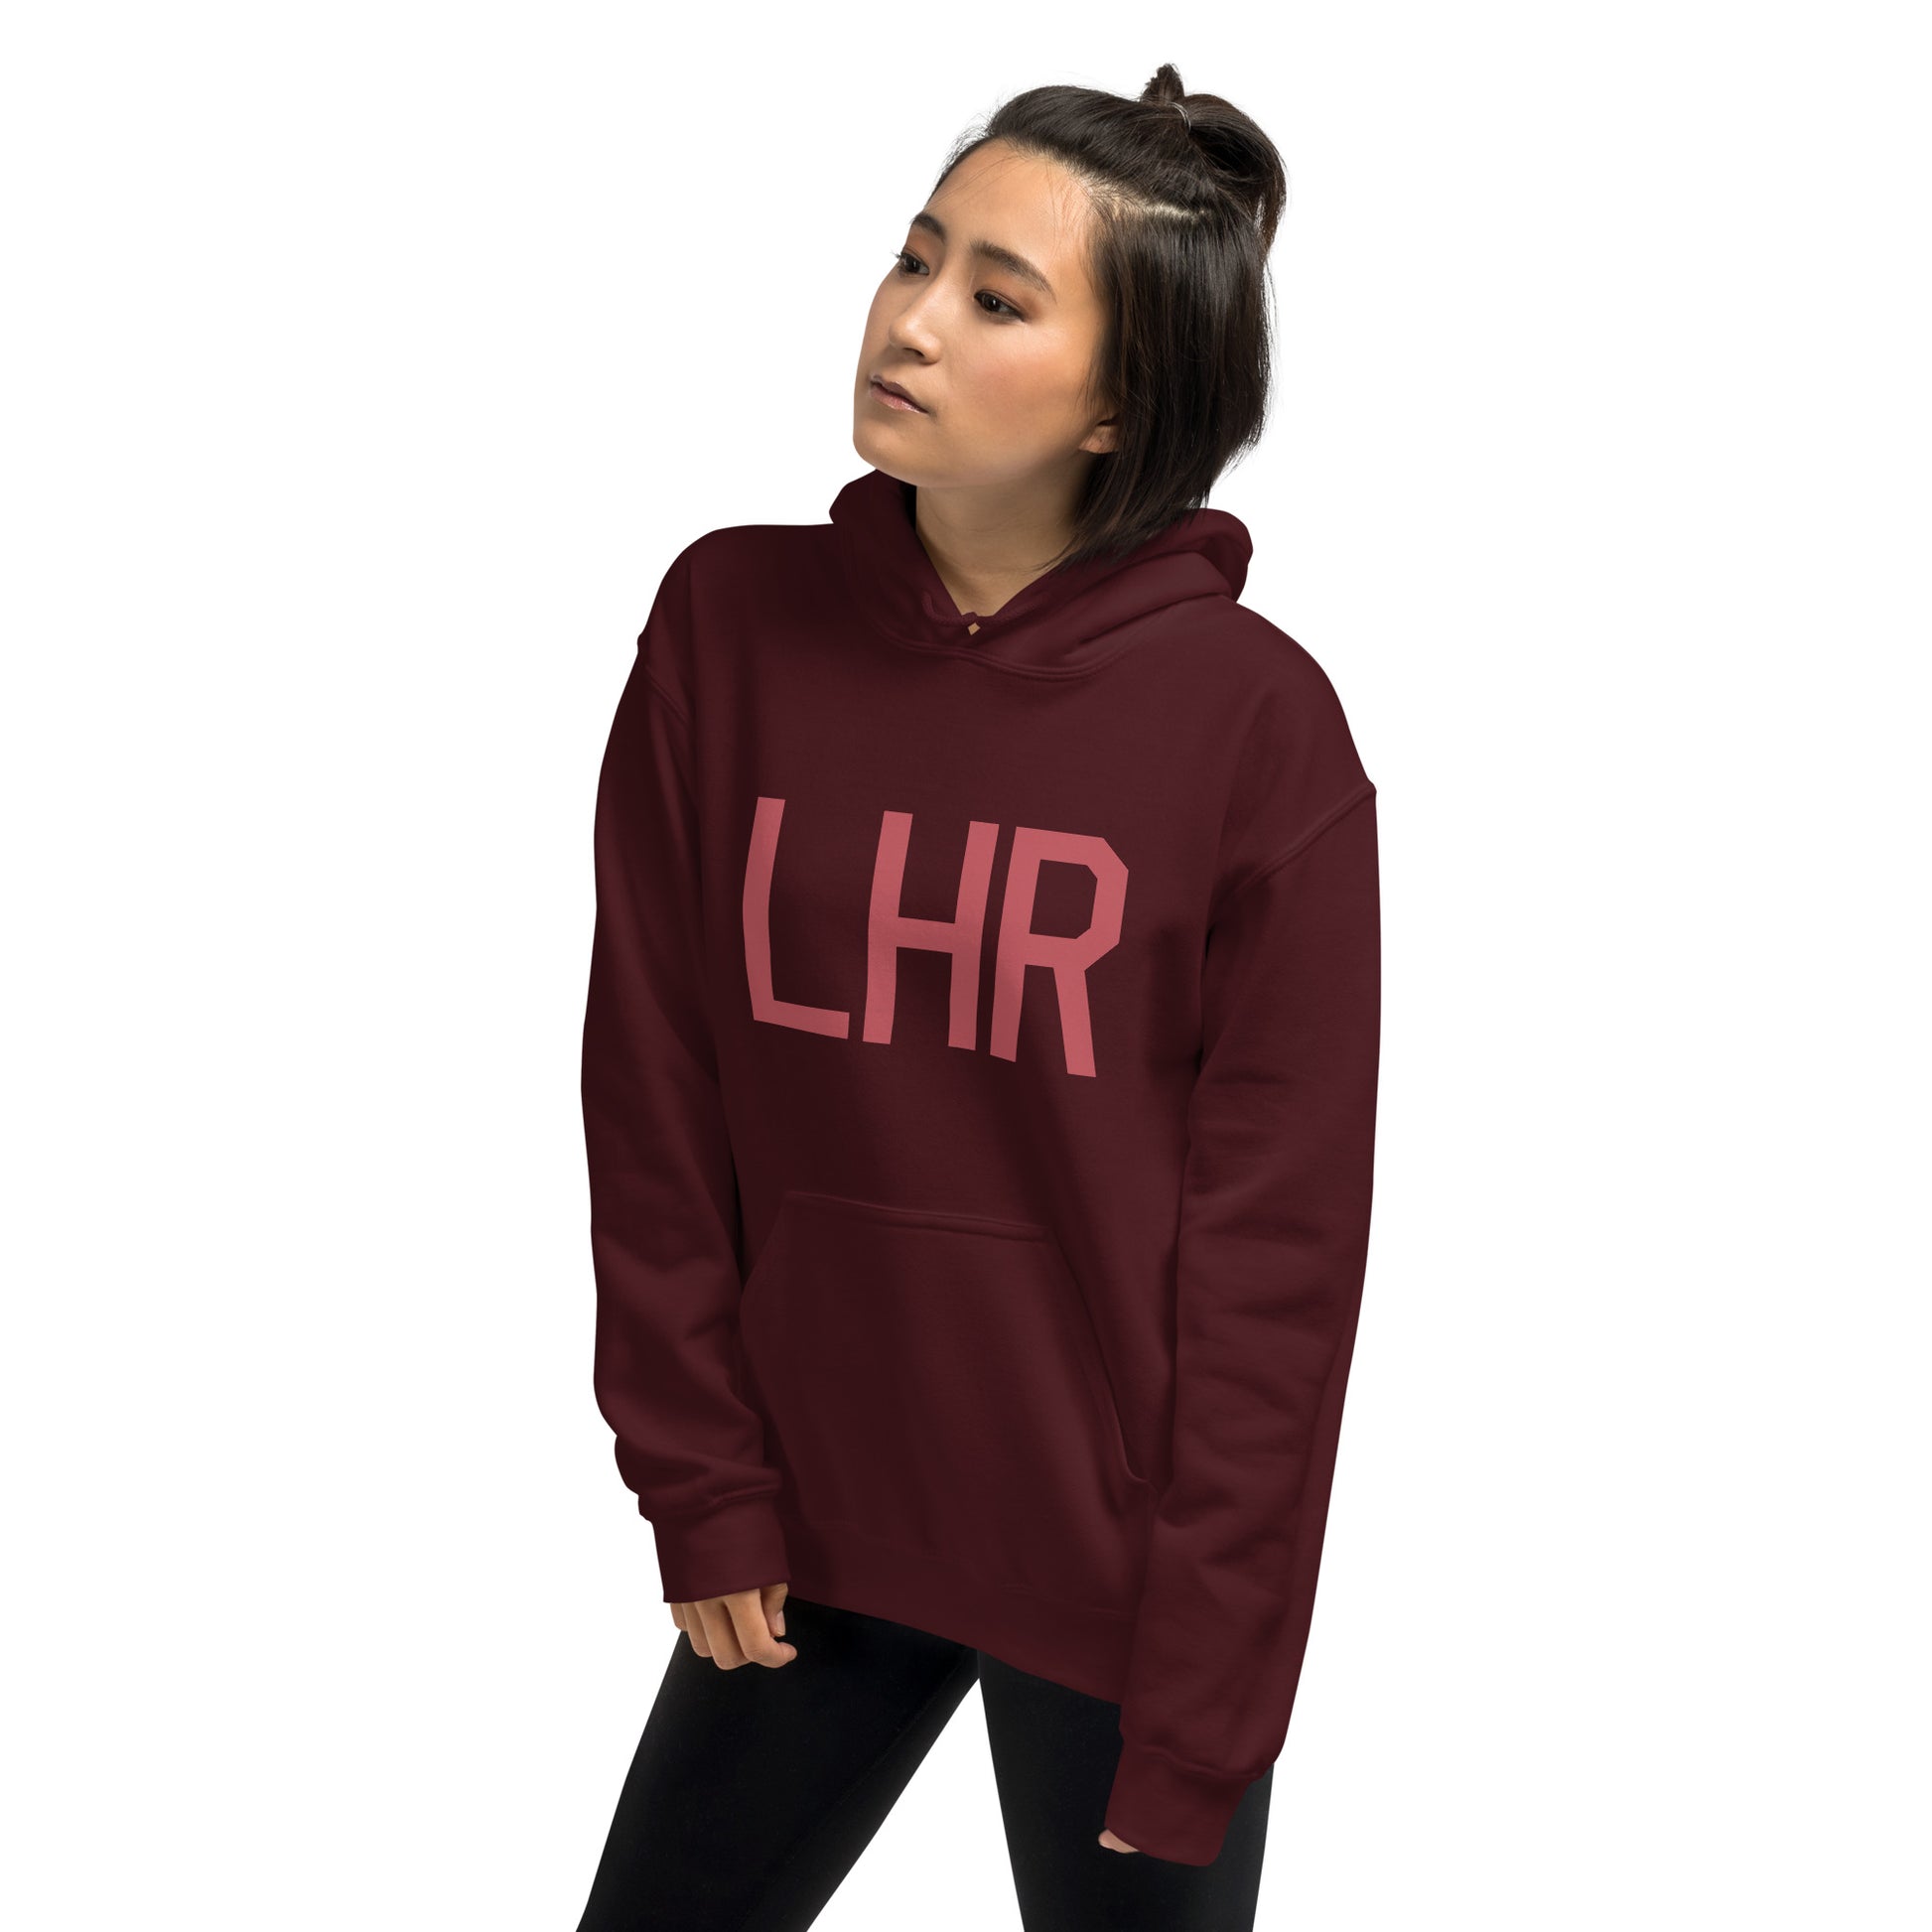 Aviation Enthusiast Hoodie - Deep Pink Graphic • LHR London • YHM Designs - Image 10